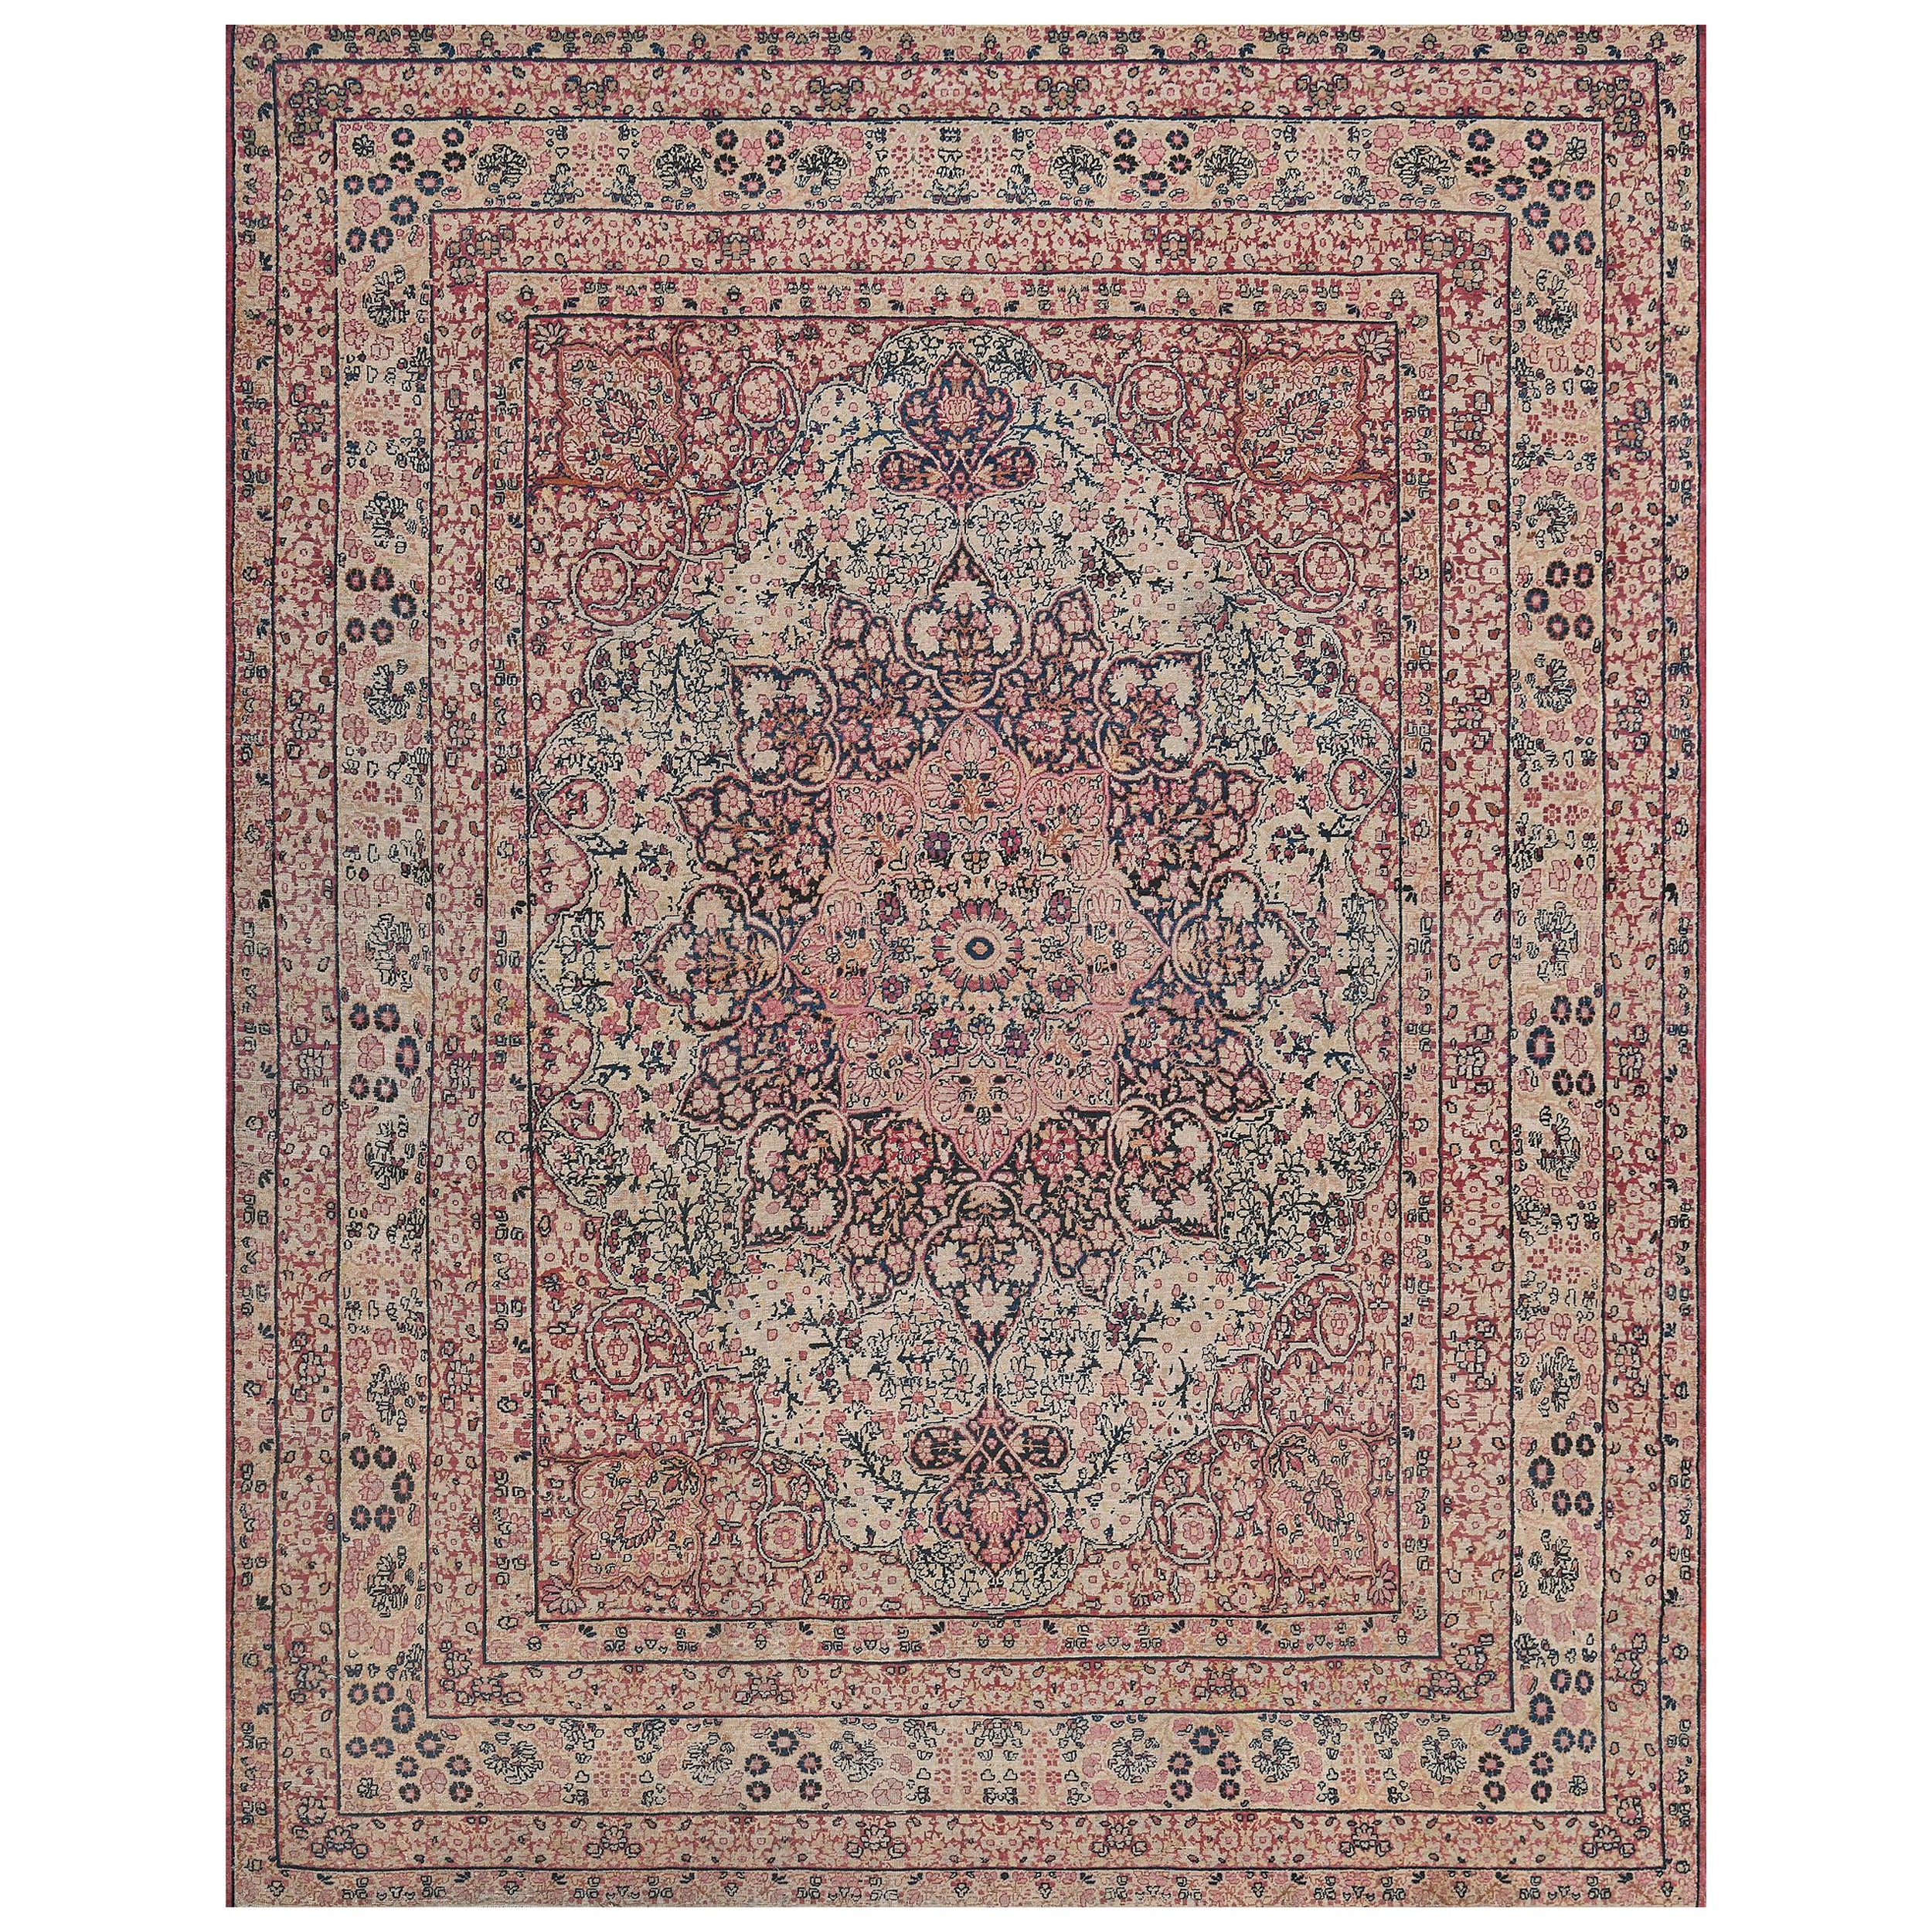 Antique Hand-Woven Traditional Floral Persian Kerman Rug 